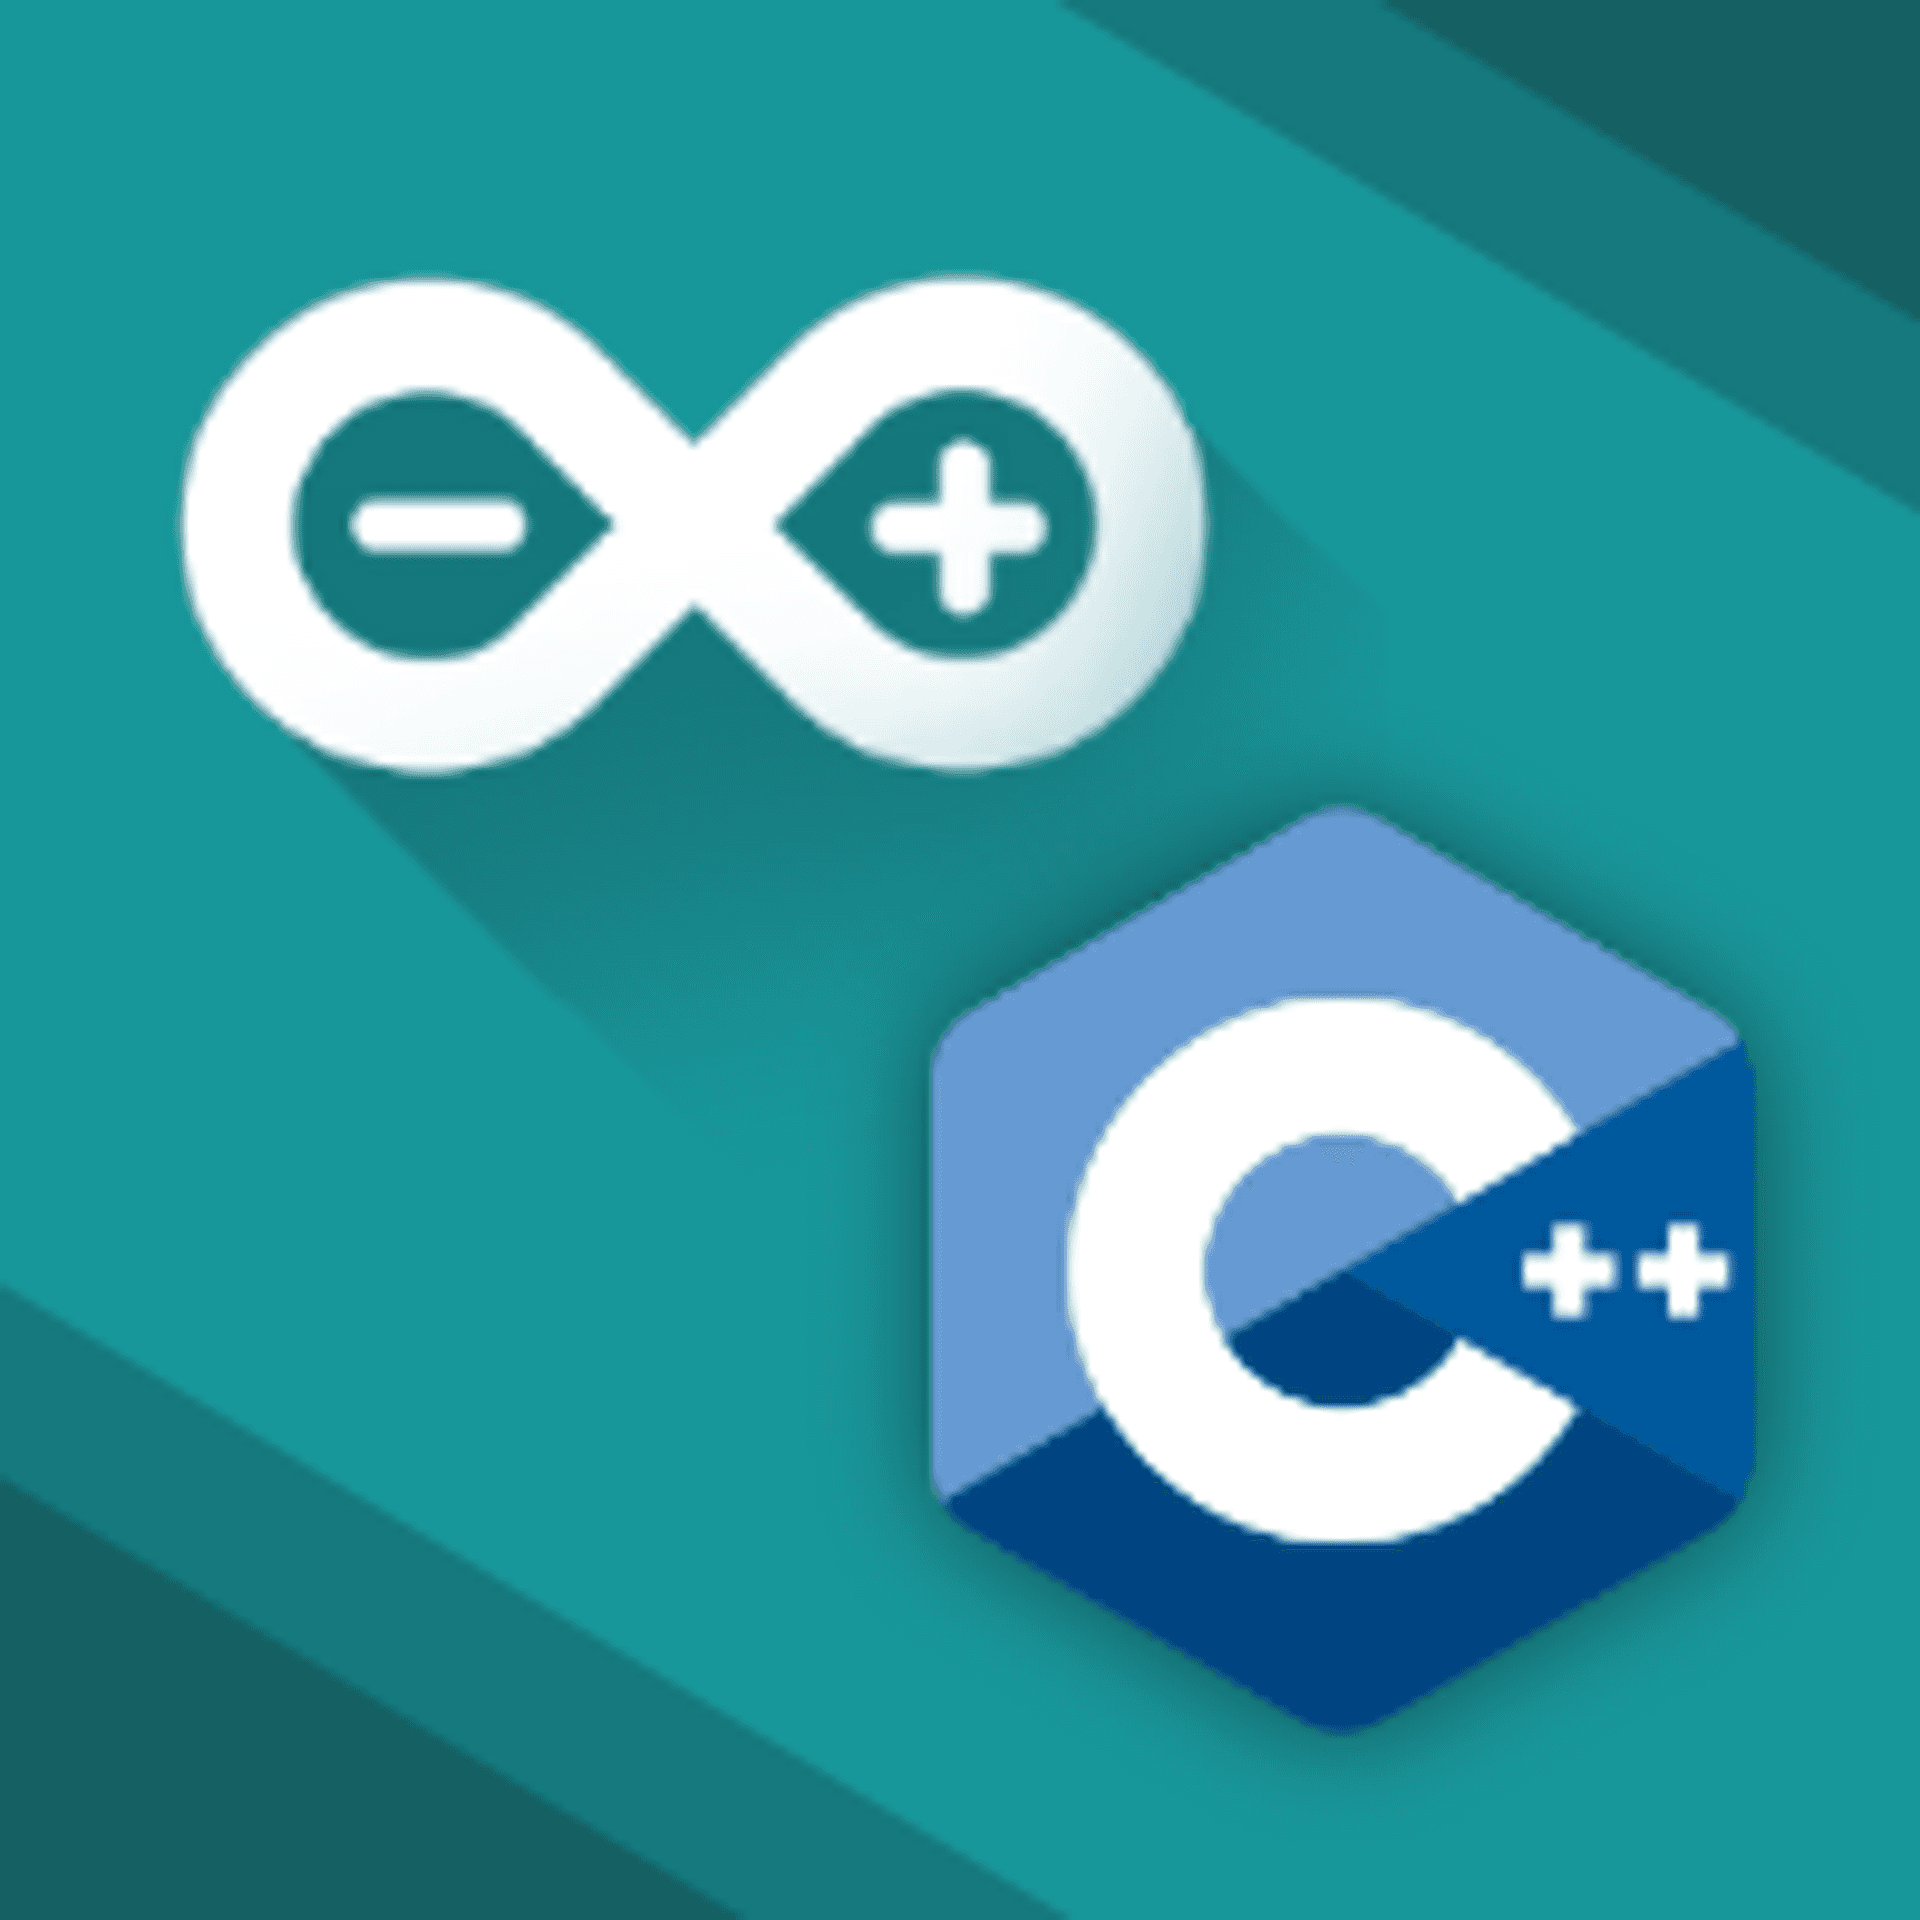 Arduino C++ by Example